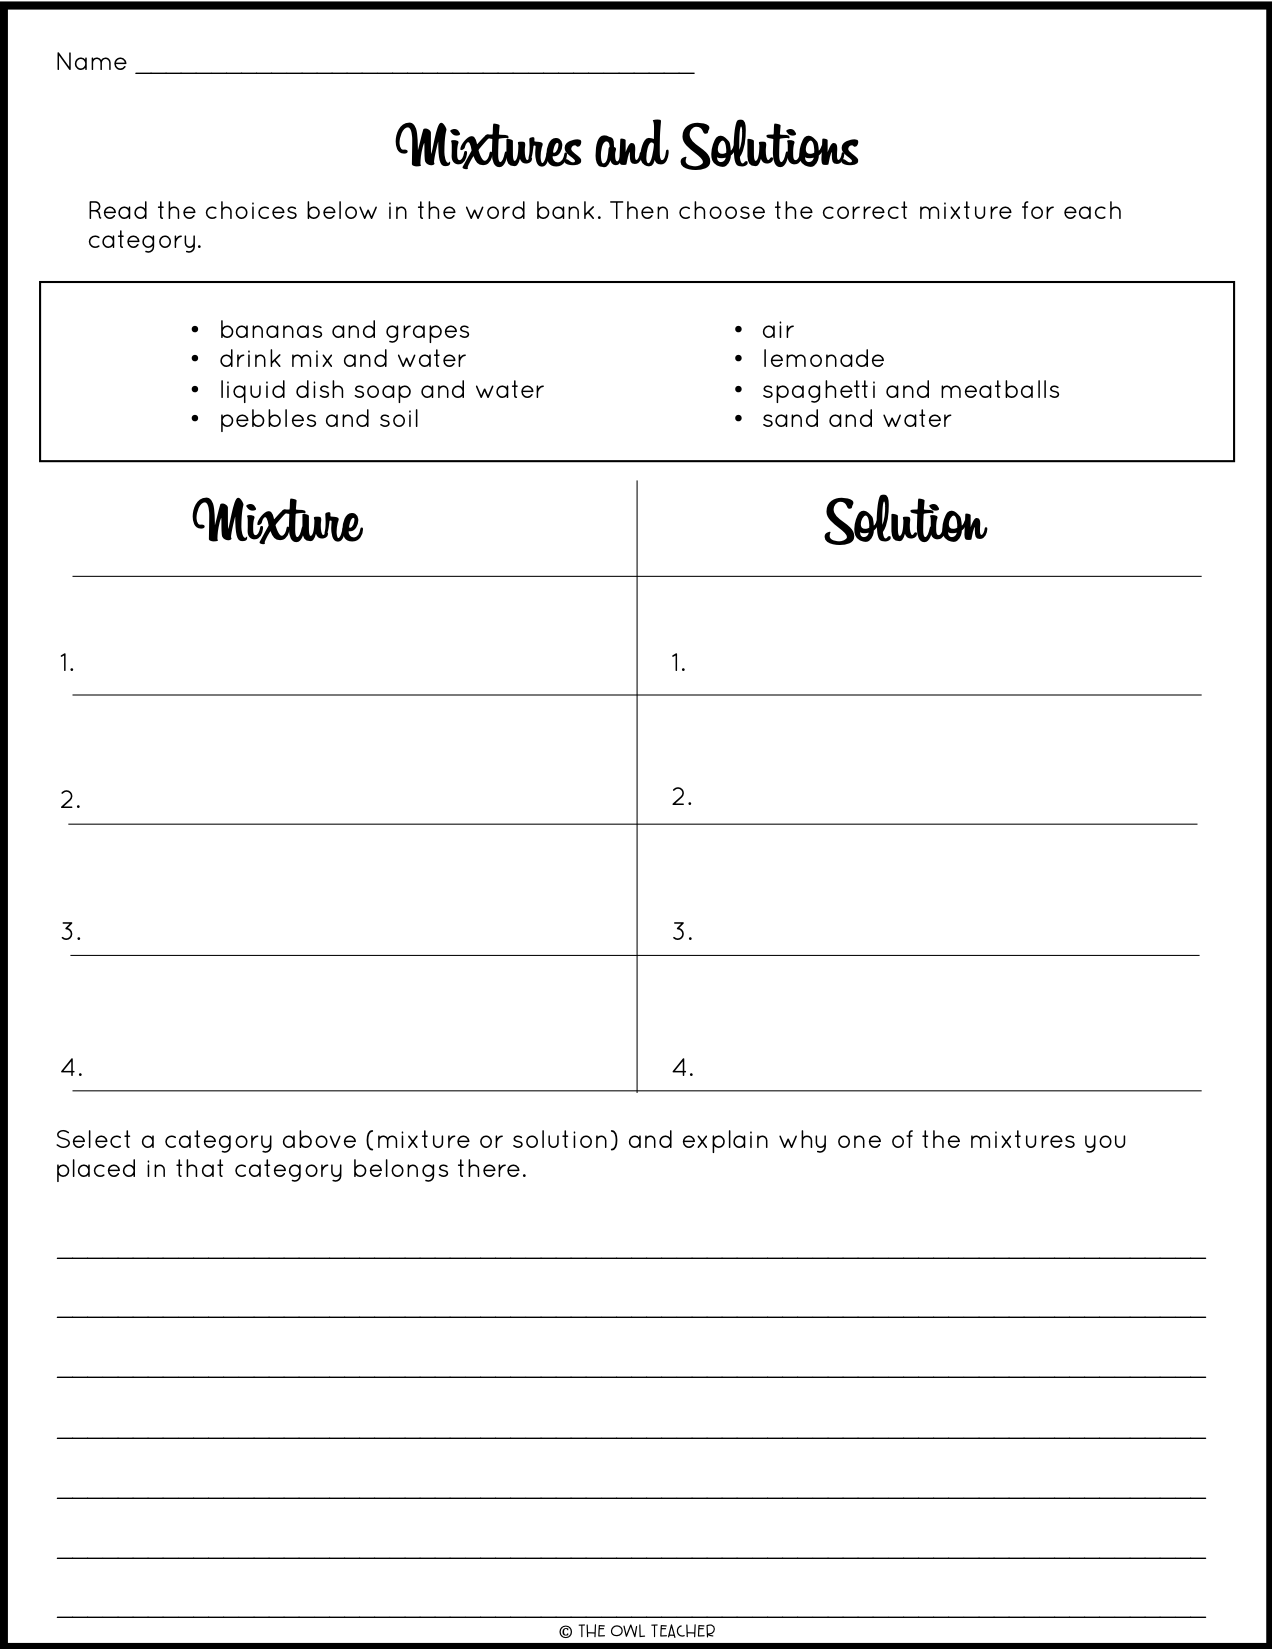 Mixtures and Solutions Craftivity - The Owl Teacher Pertaining To Mixtures And Solutions Worksheet